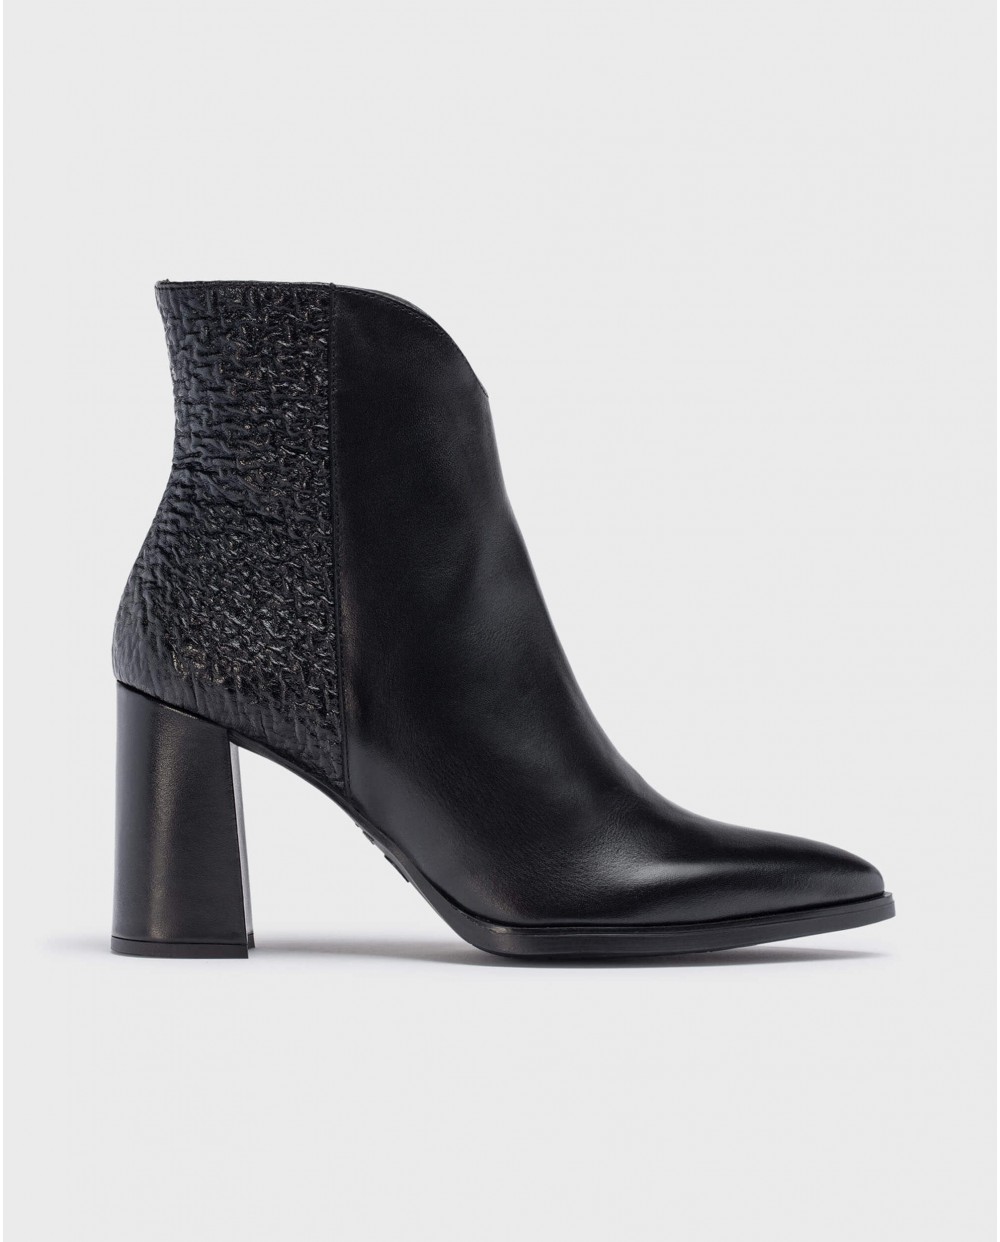 Wonders-Ankle Boots-Black ZENIA ankle boot